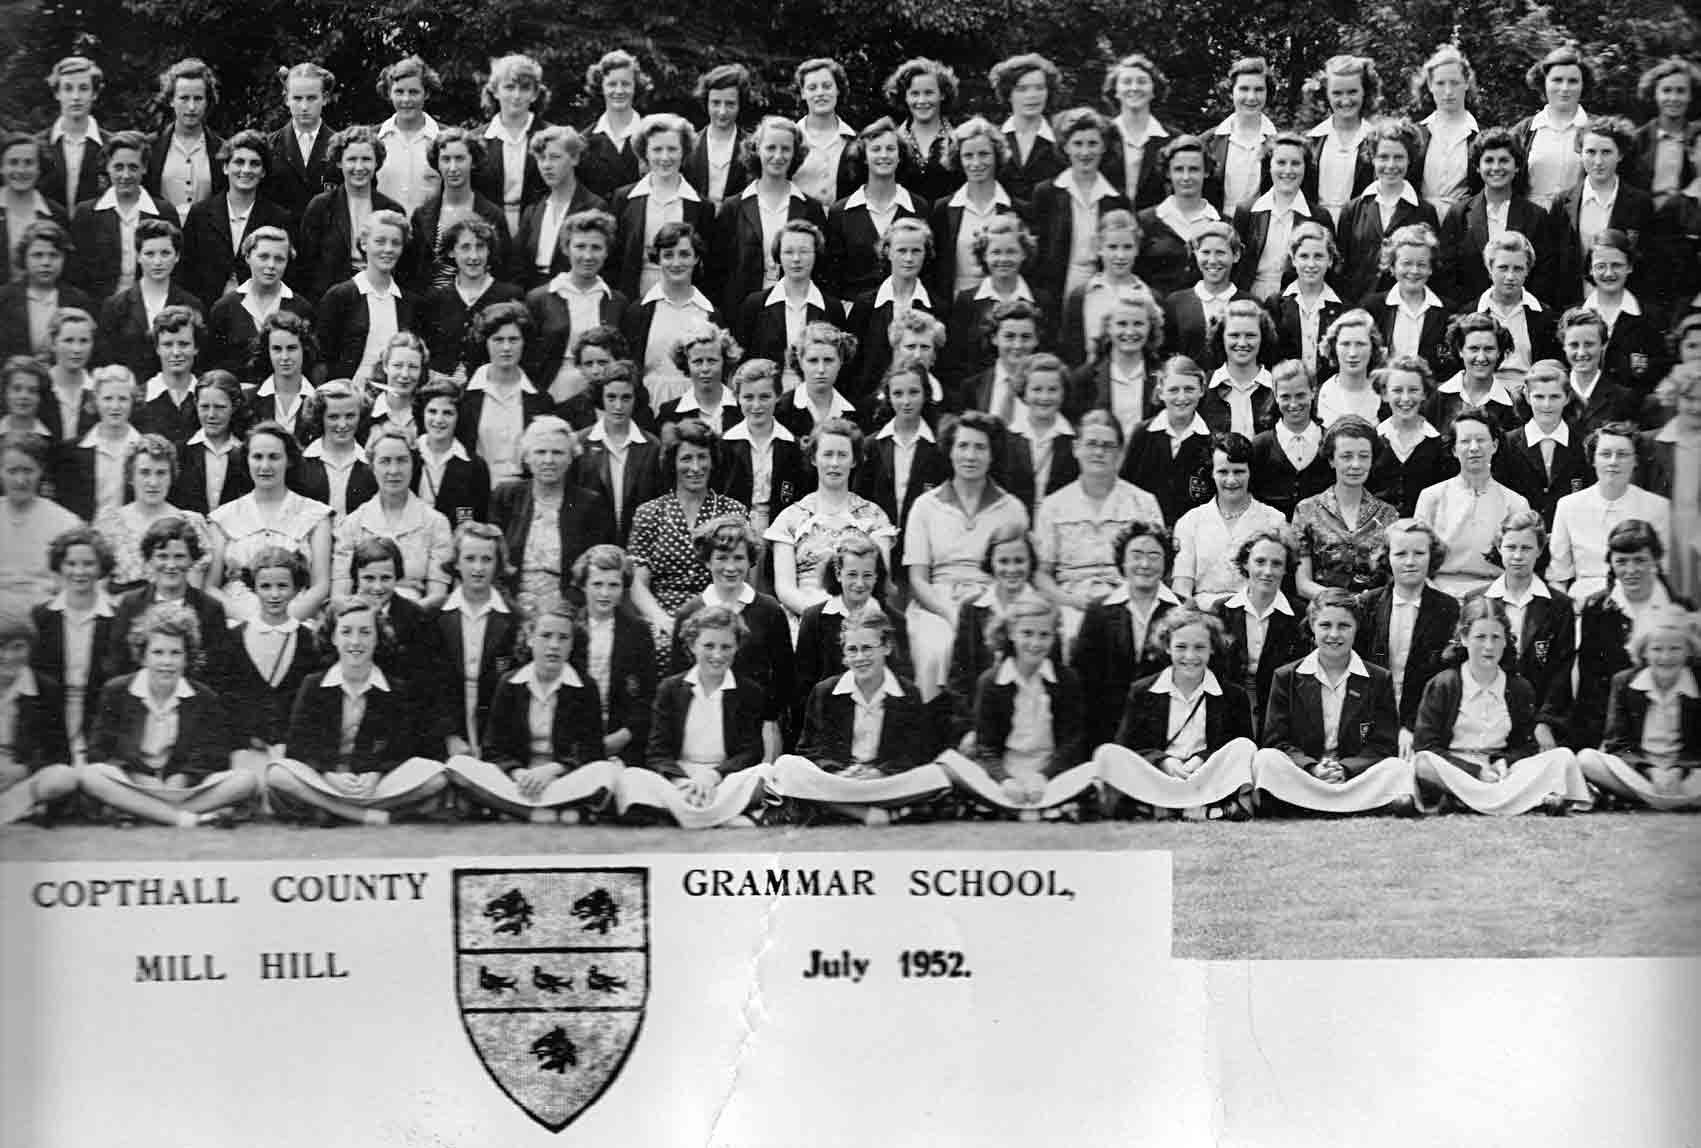 Fourth section of the 1952 school photograph for Copthall County Grammar School